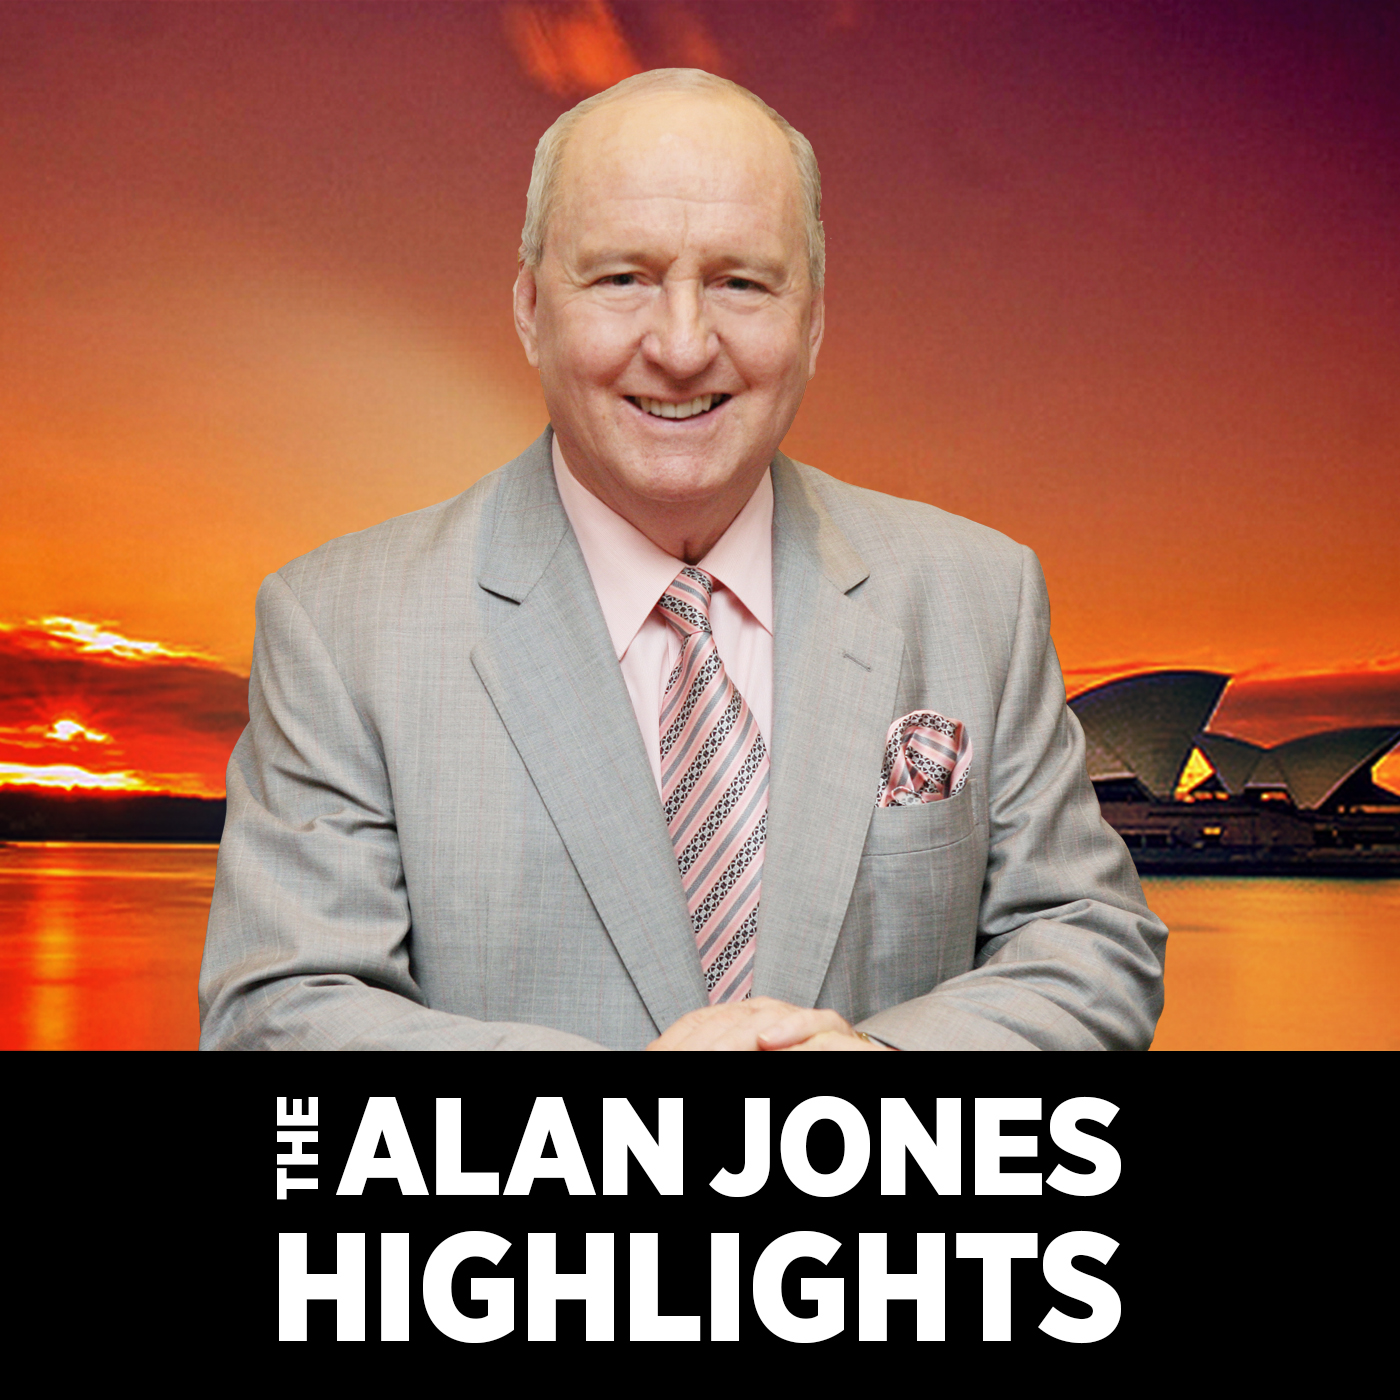 Alan through the years: A very special audio tribute